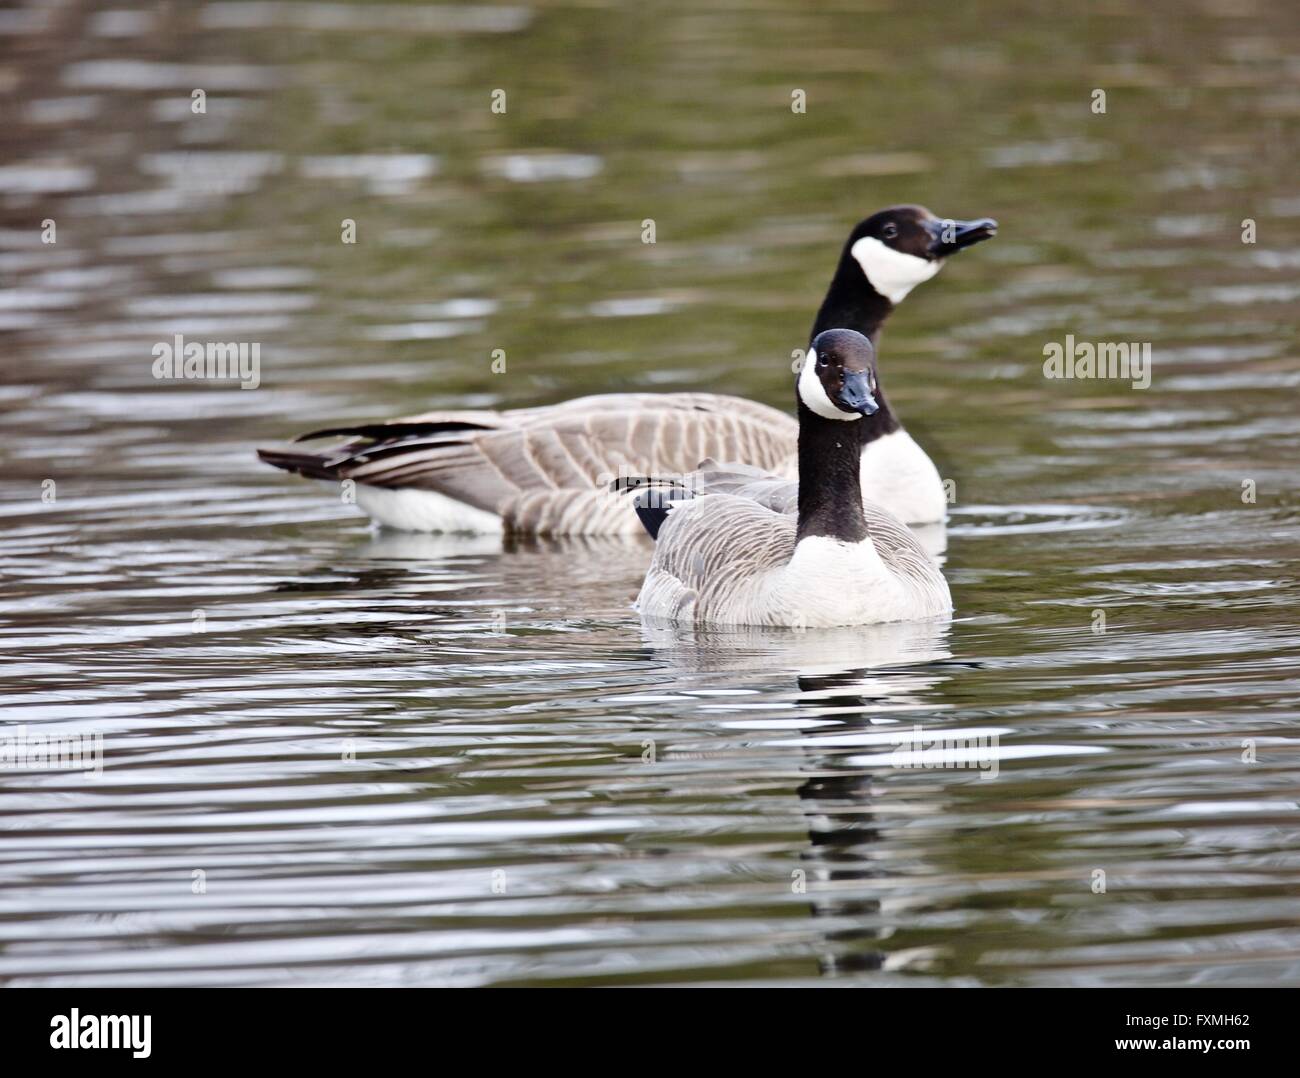 'Canada' 'Geese' 'Pond' 'Water' 'Park' 'Outdoors' Stock Photo